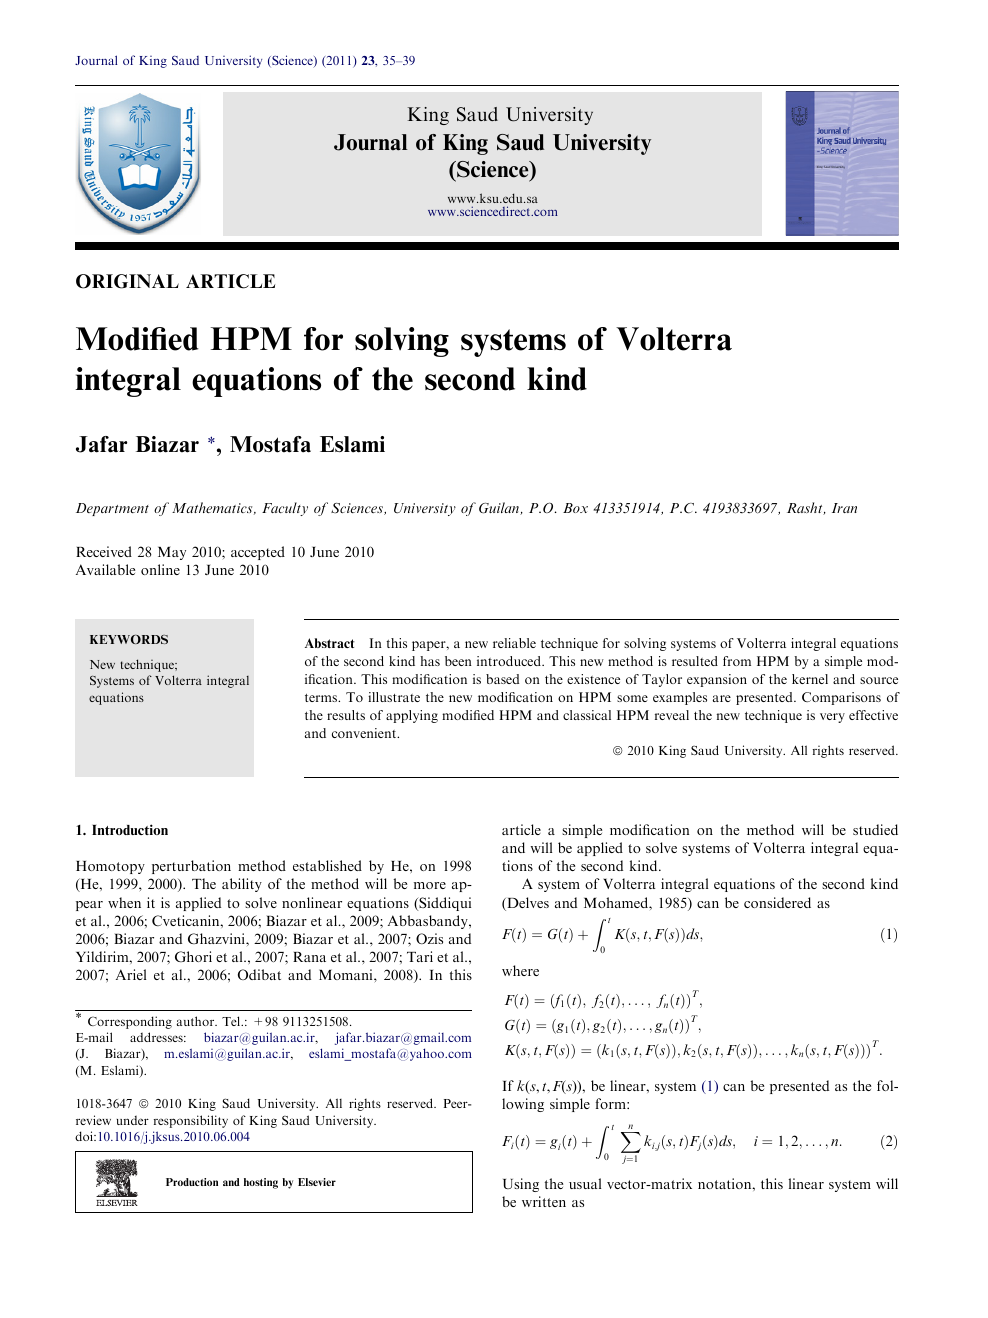 Modified Hpm For Solving Systems Of Volterra Integral Equations Of The Second Kind Topic Of Research Paper In Physical Sciences Download Scholarly Article Pdf And Read For Free On Cyberleninka Open